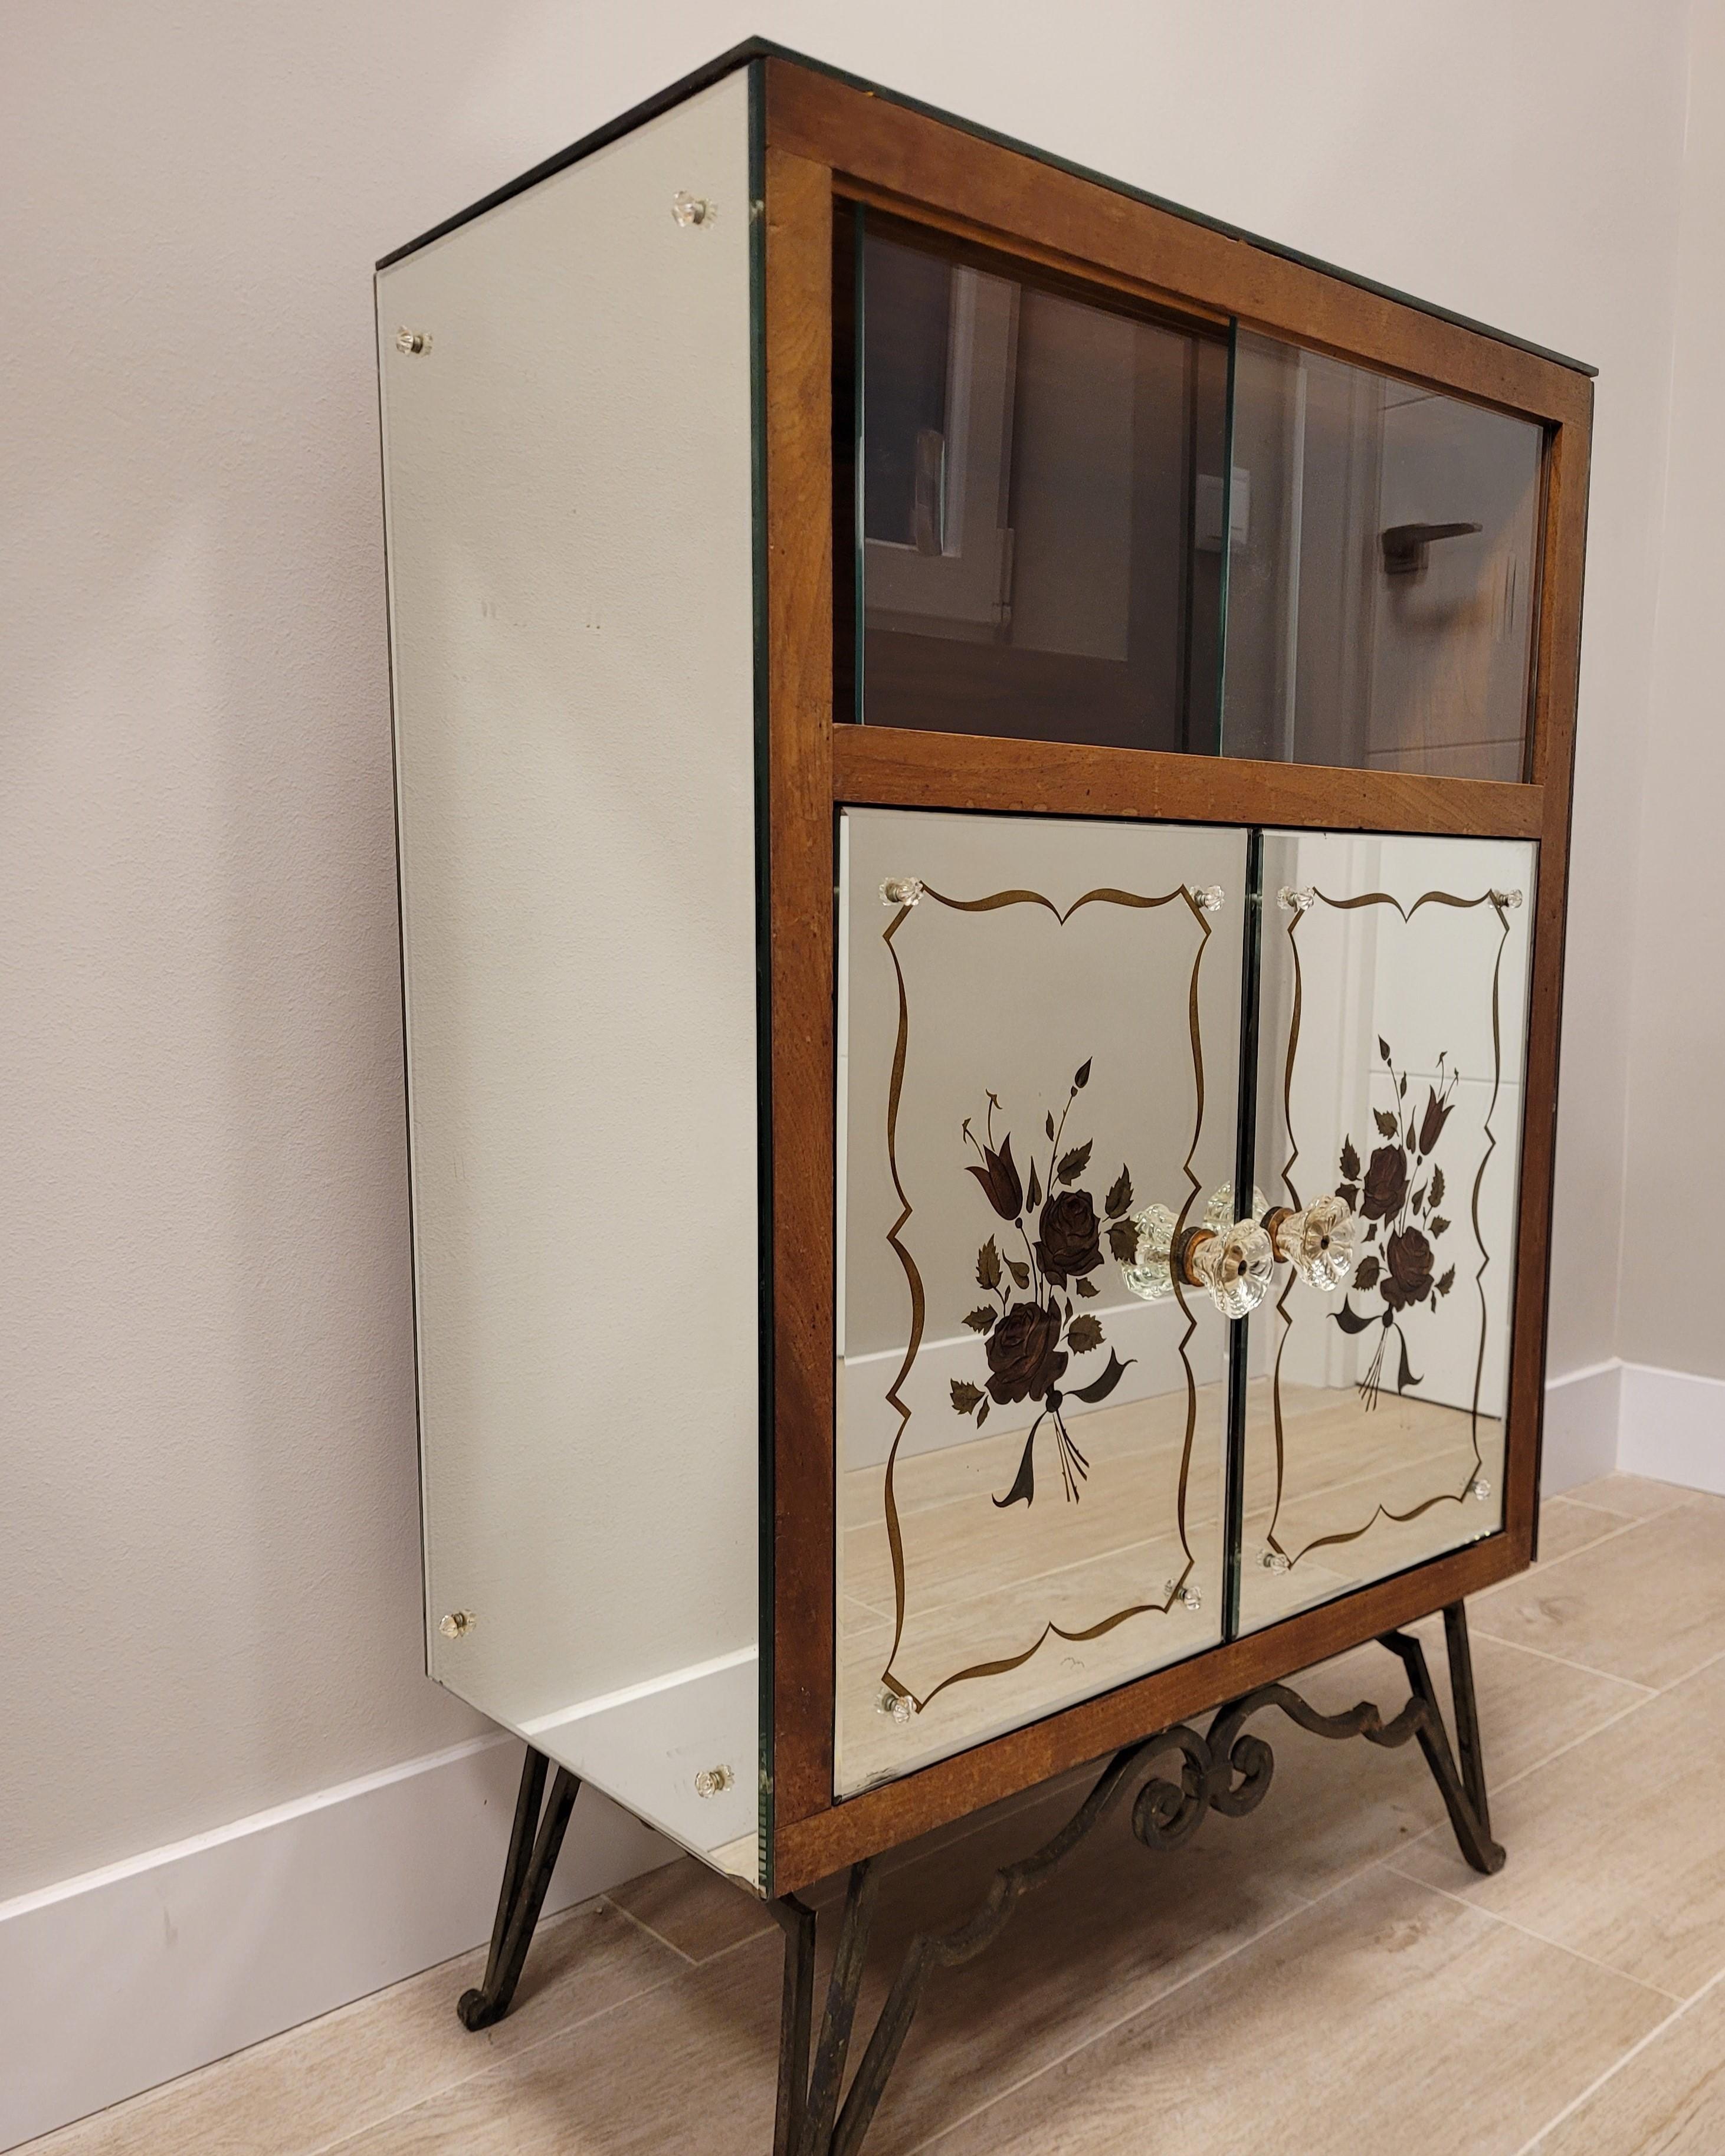 Hand-Crafted Artdeco Italian Crystal Cabinet, Bookcases, Endtable